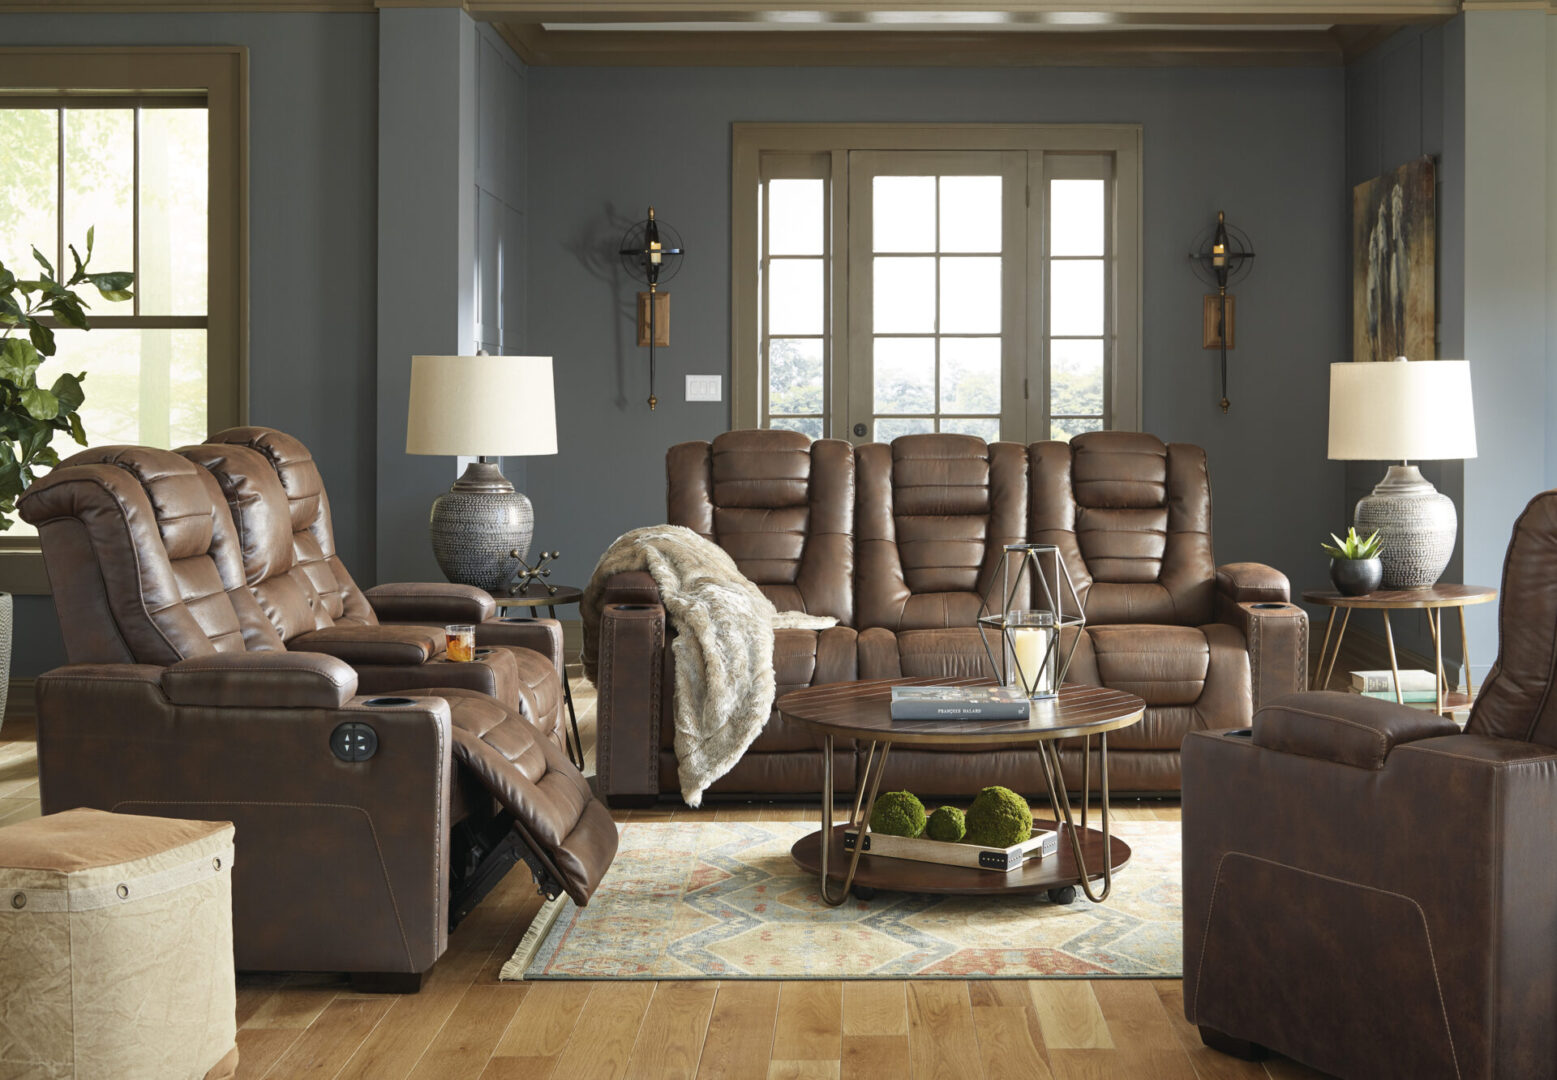 A living room with two couches and a recliner.